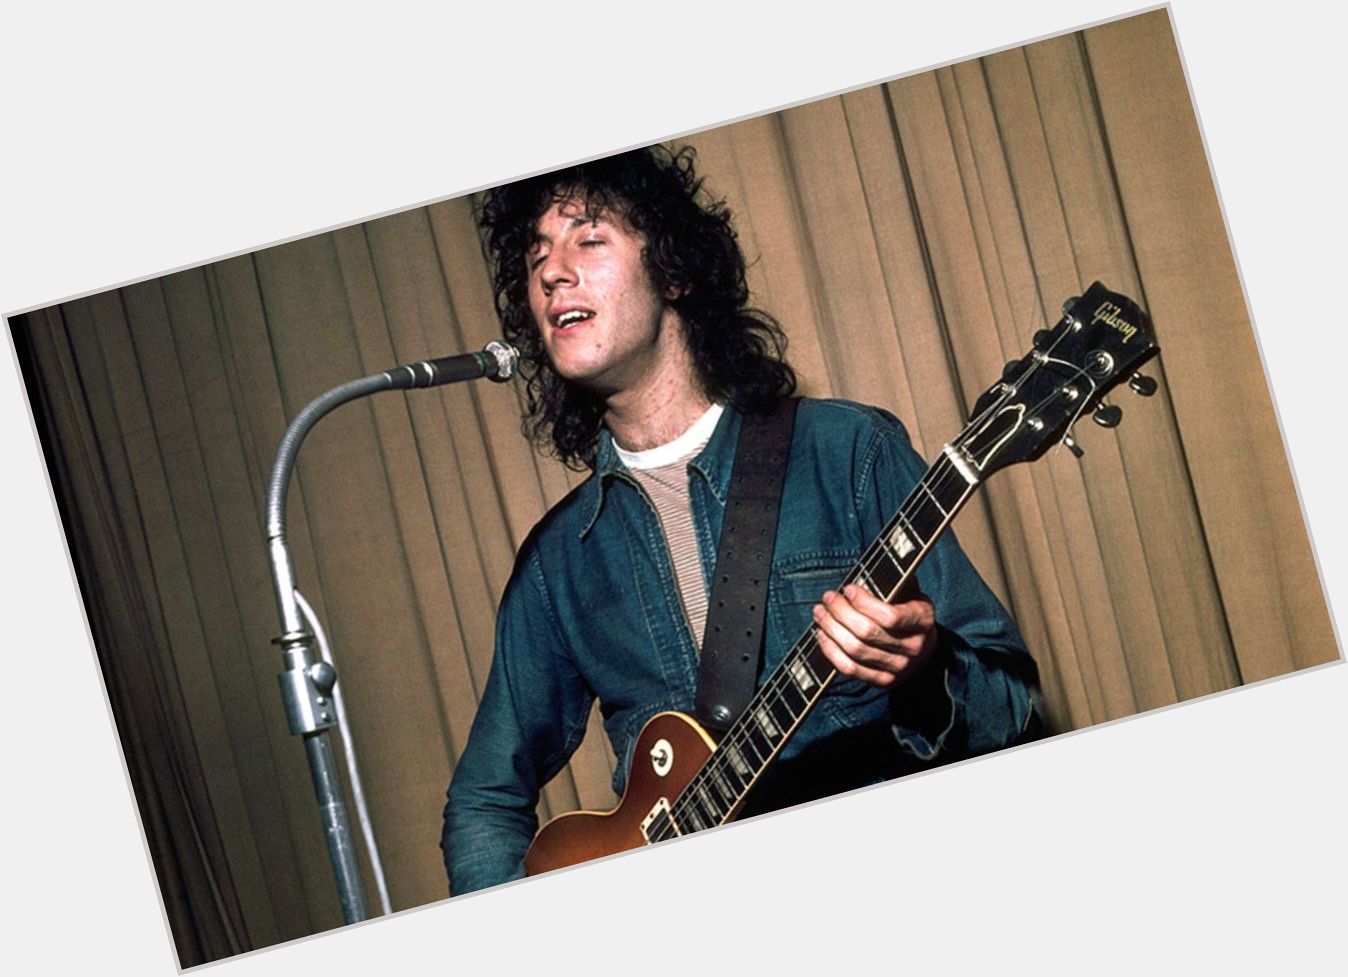 Happy birthday to British blues rock ist and founding member of Fleetwood Mac Peter Green! 